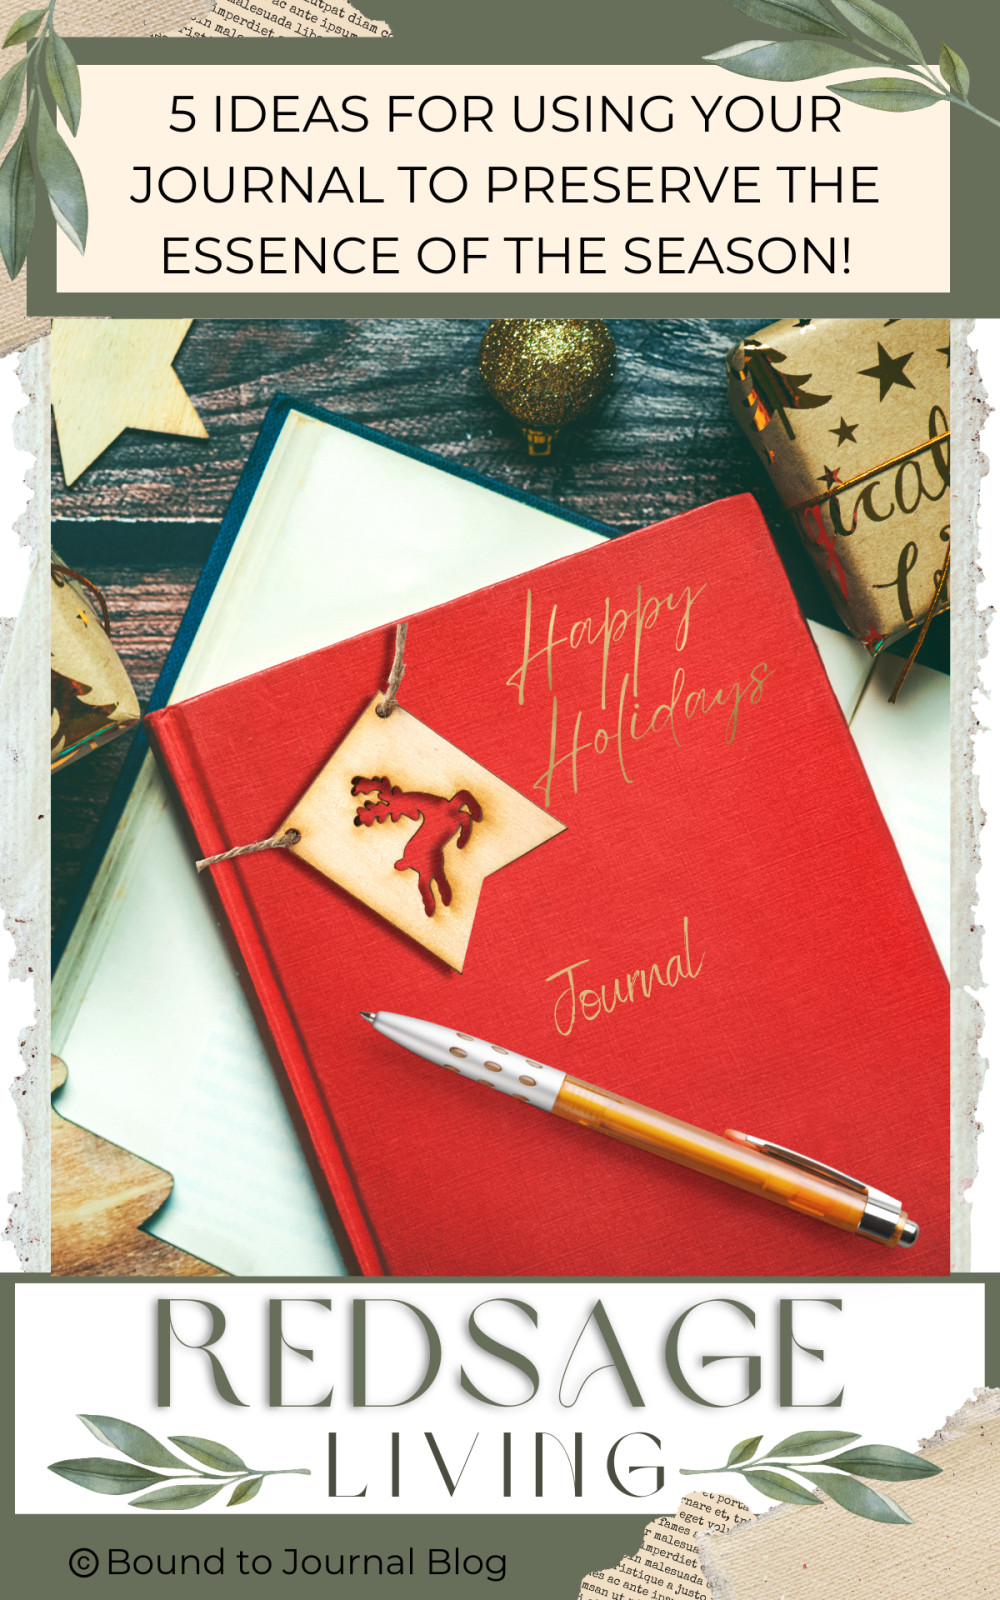 5 Ideas for Using Your Journal to Preserve the Essence of the Season!